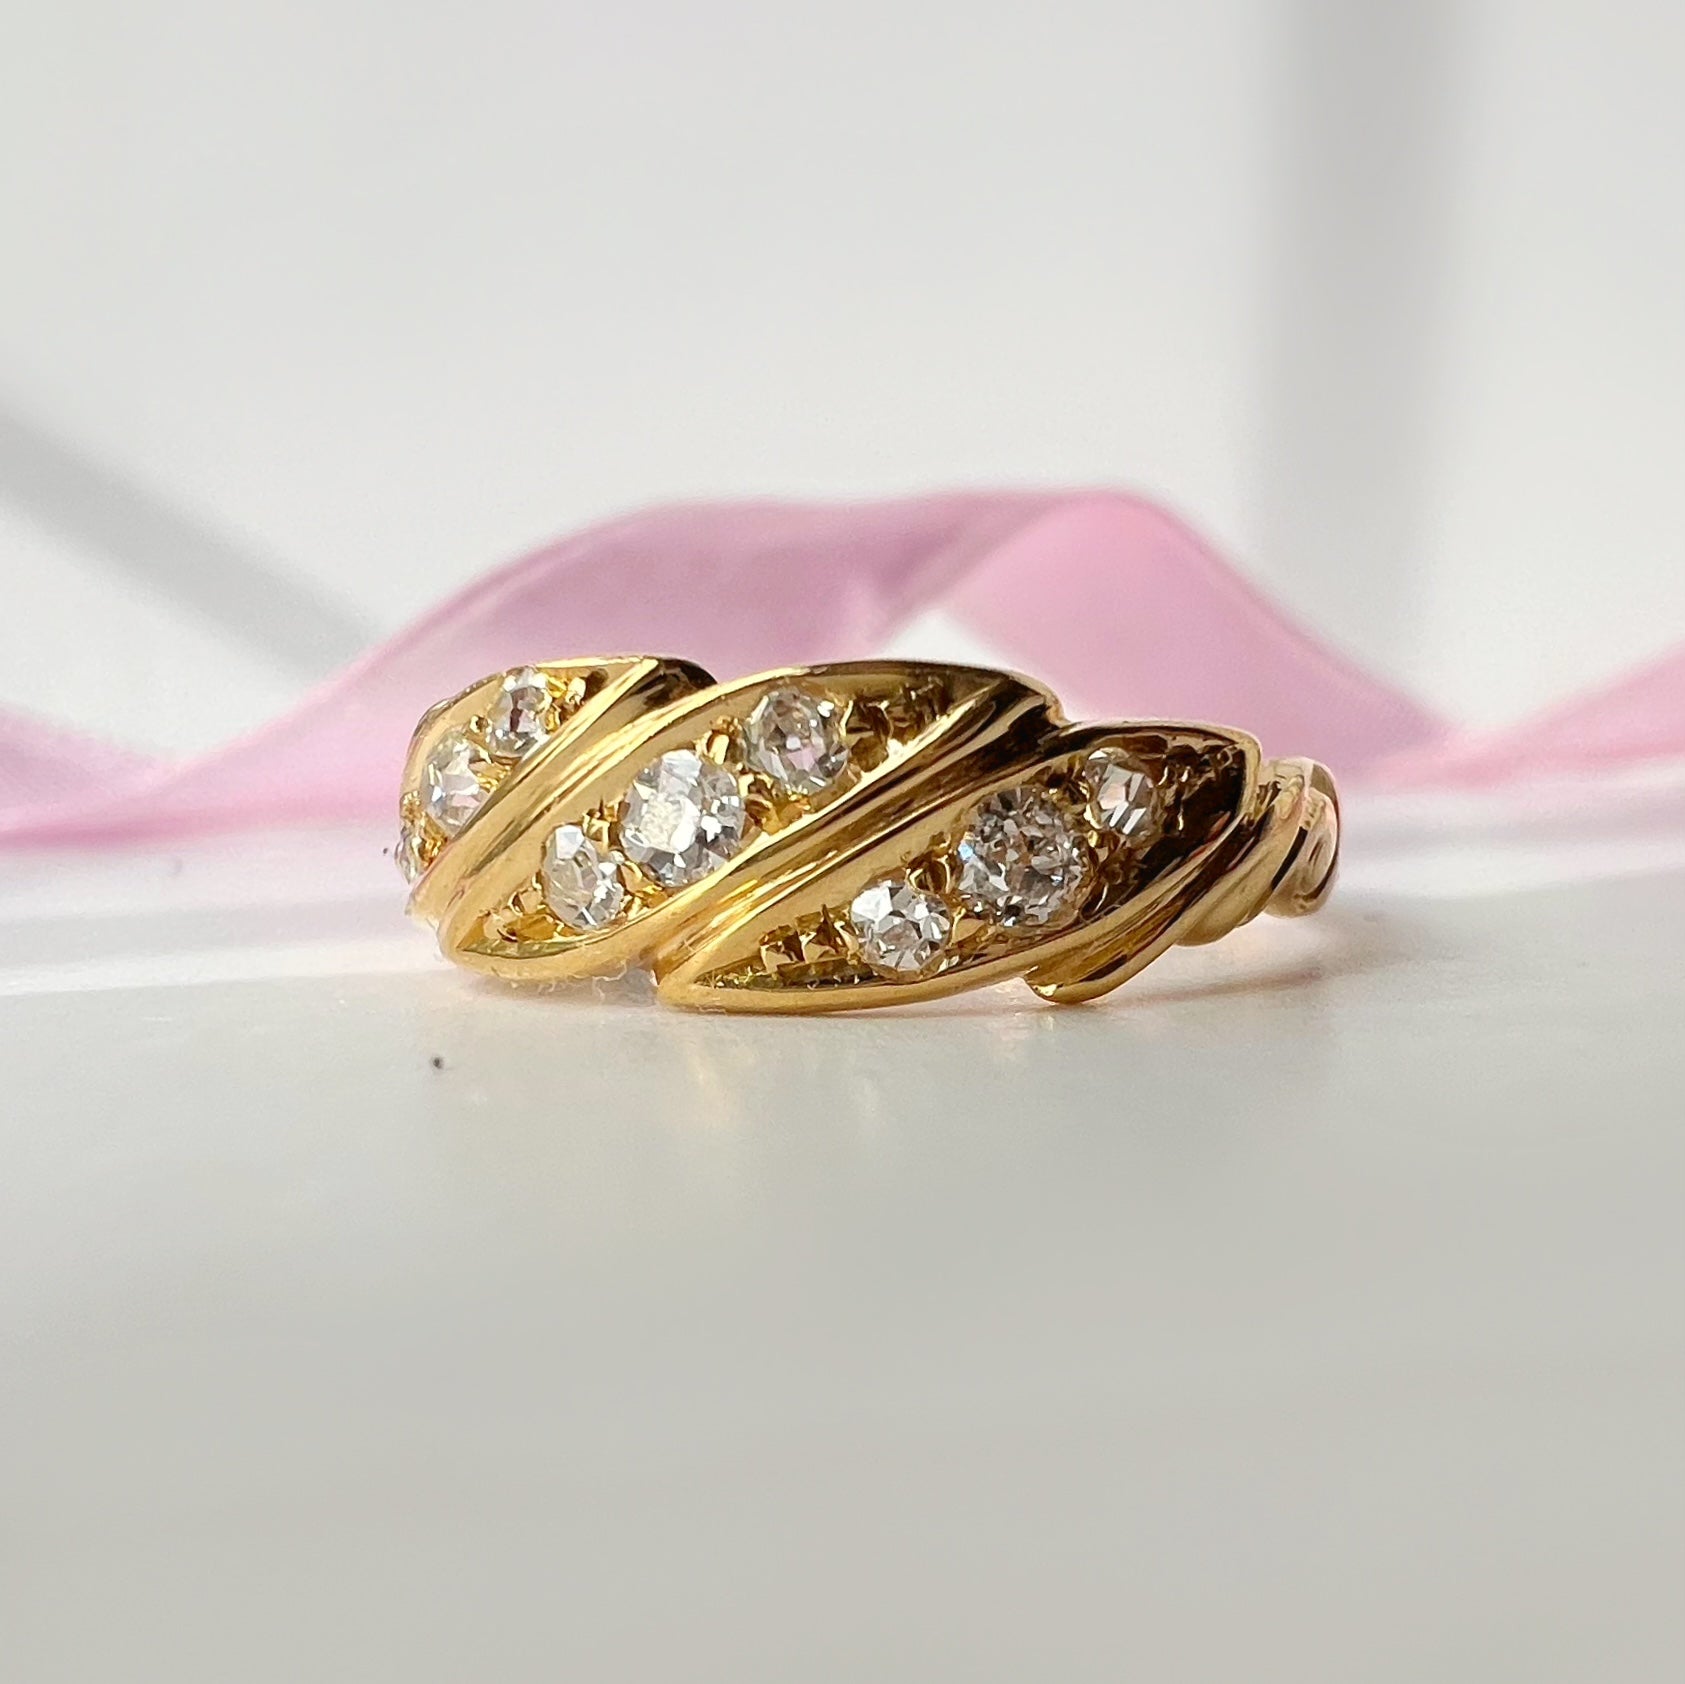 Antique Gold Band Ring with Single Cut Diamonds